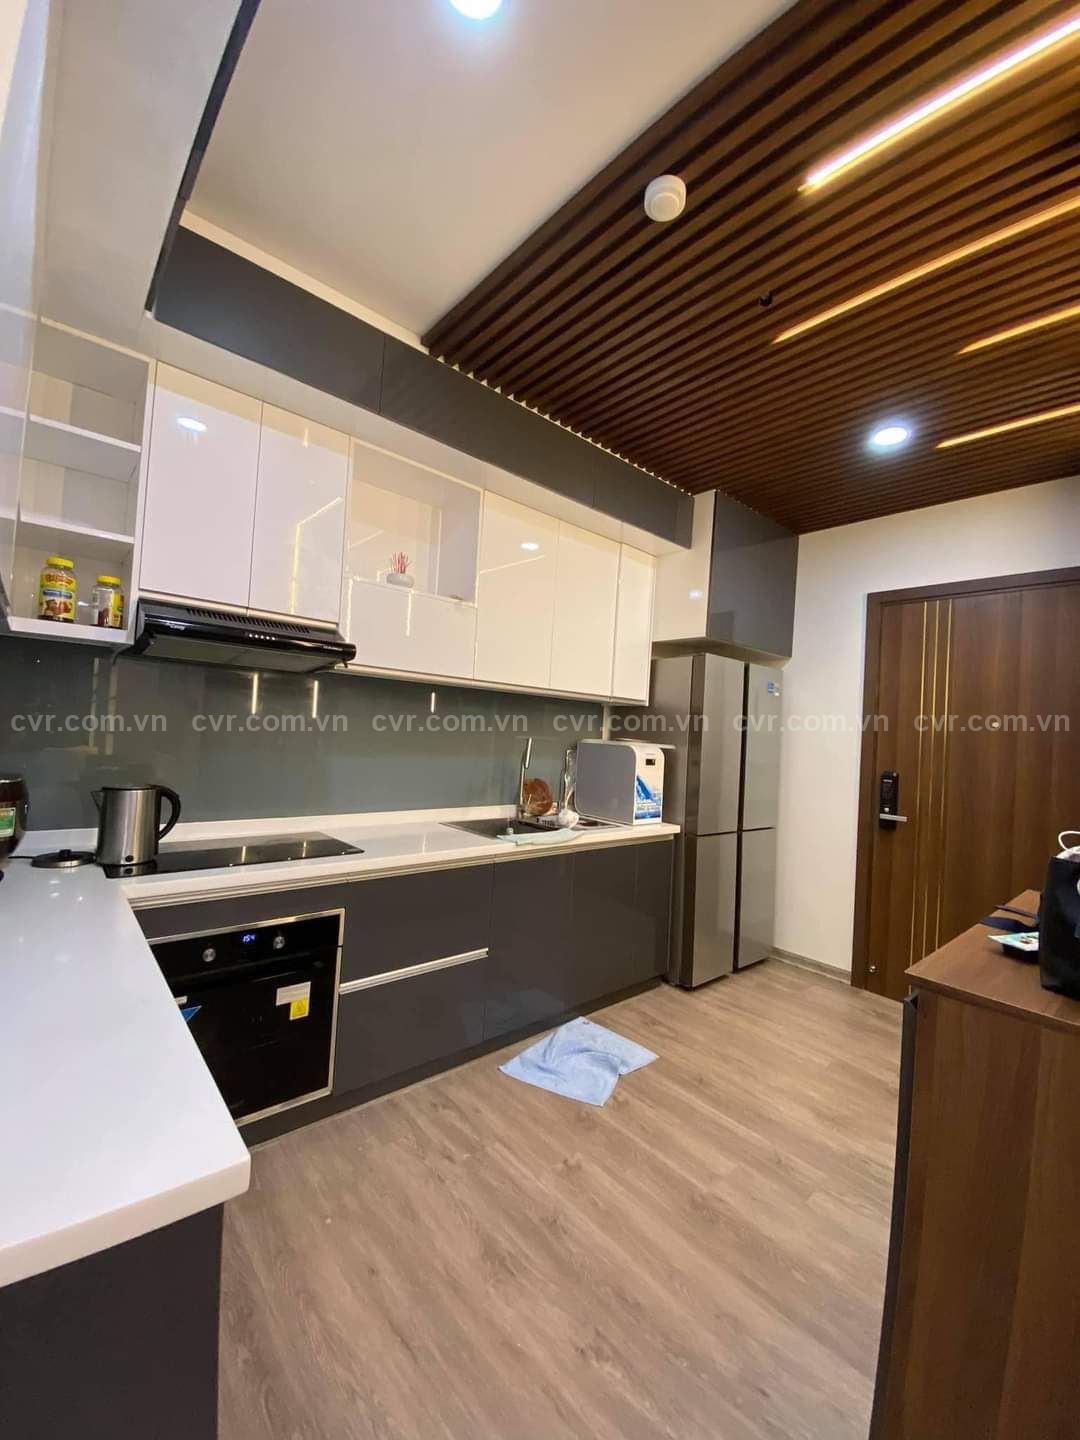 2 Bedroom Apartment For Rent In Monarchy B - Ảnh 1